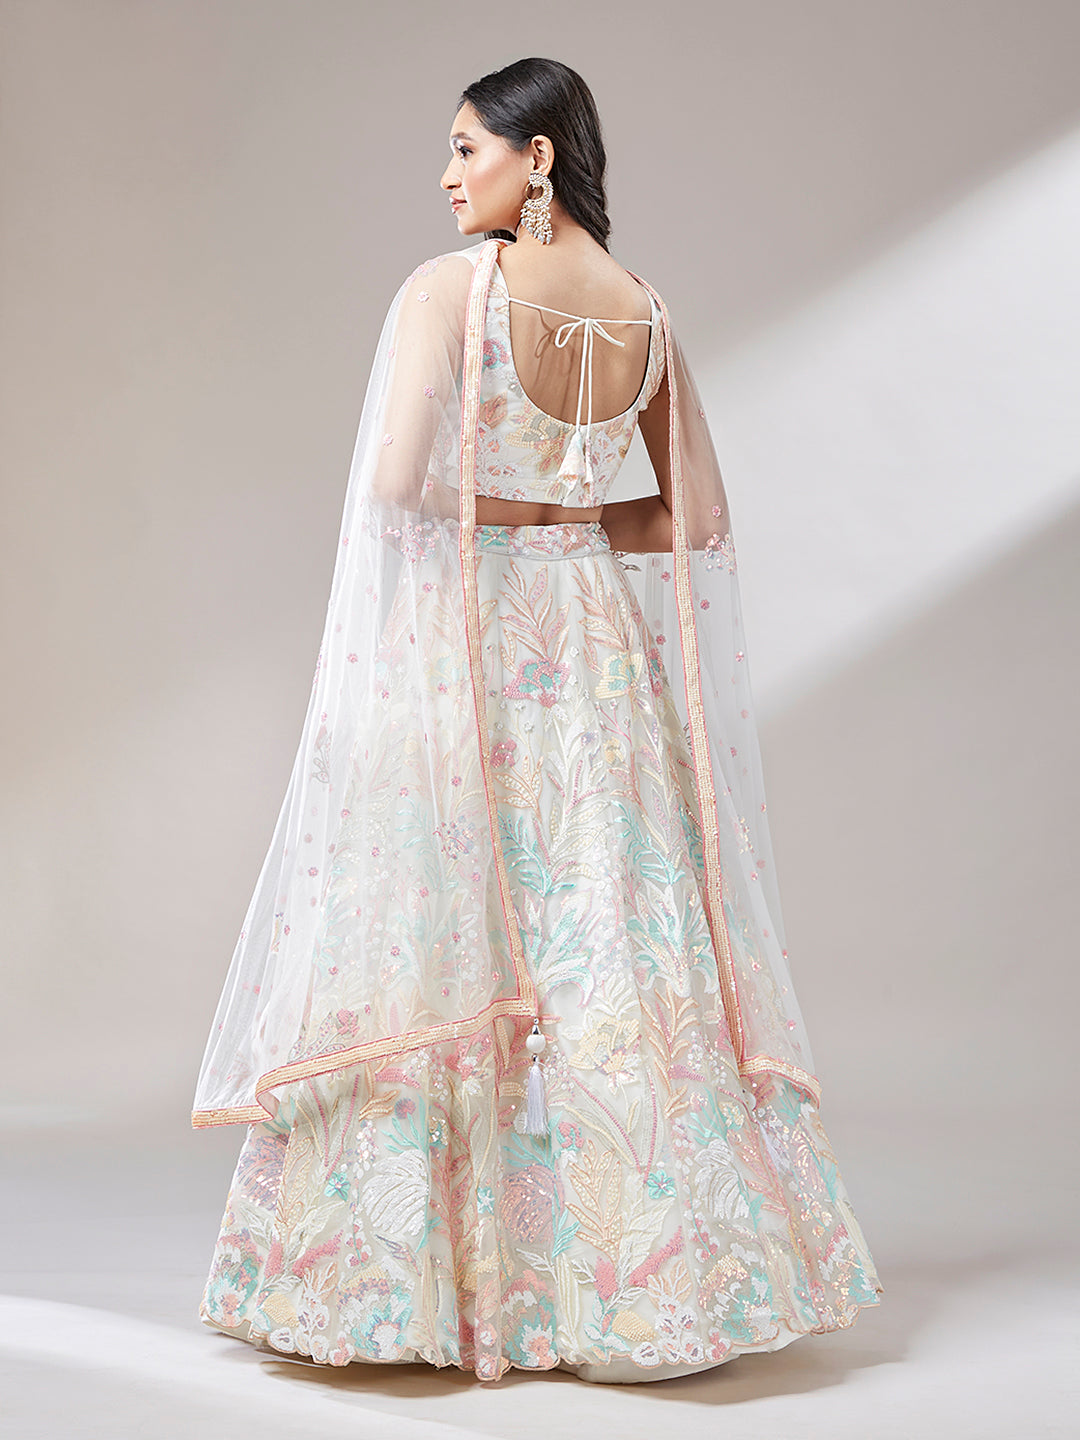 Women 's Cream Net Sequinse Work Ready to Wear Lehenga & stitched Blouse with Dupatta - Royal Dwells